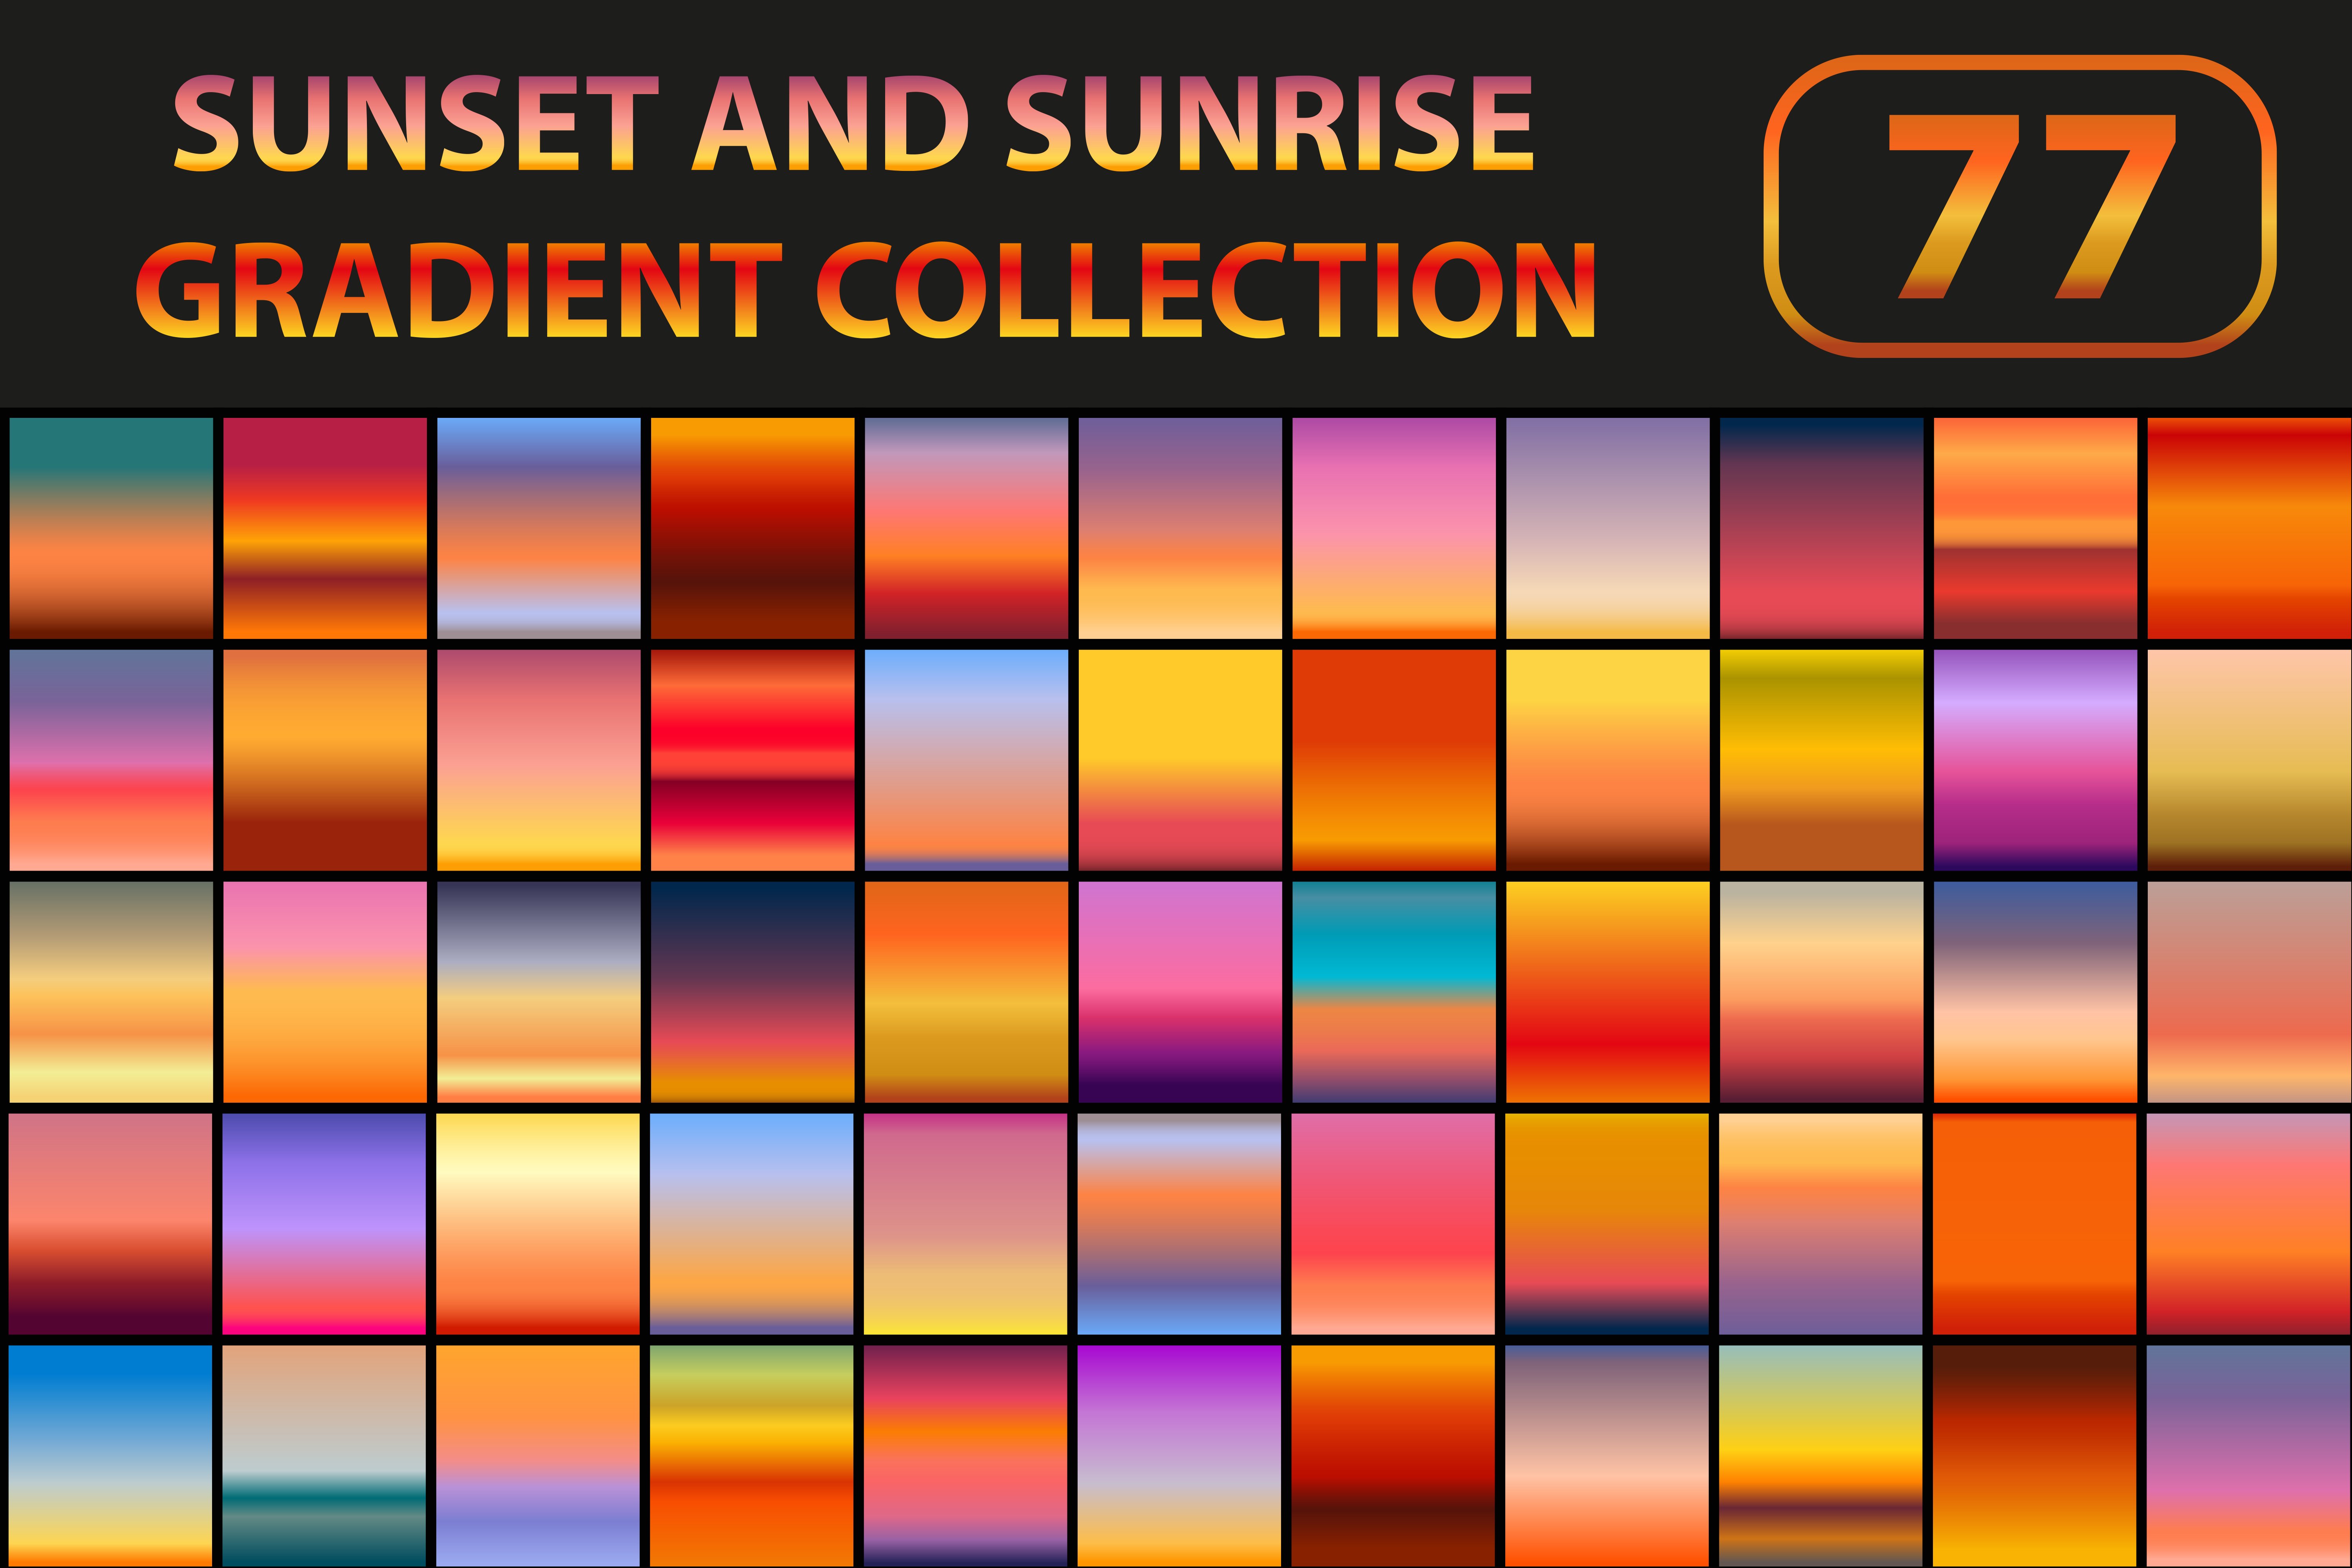 Sunset and sunrise gradient set cover image.